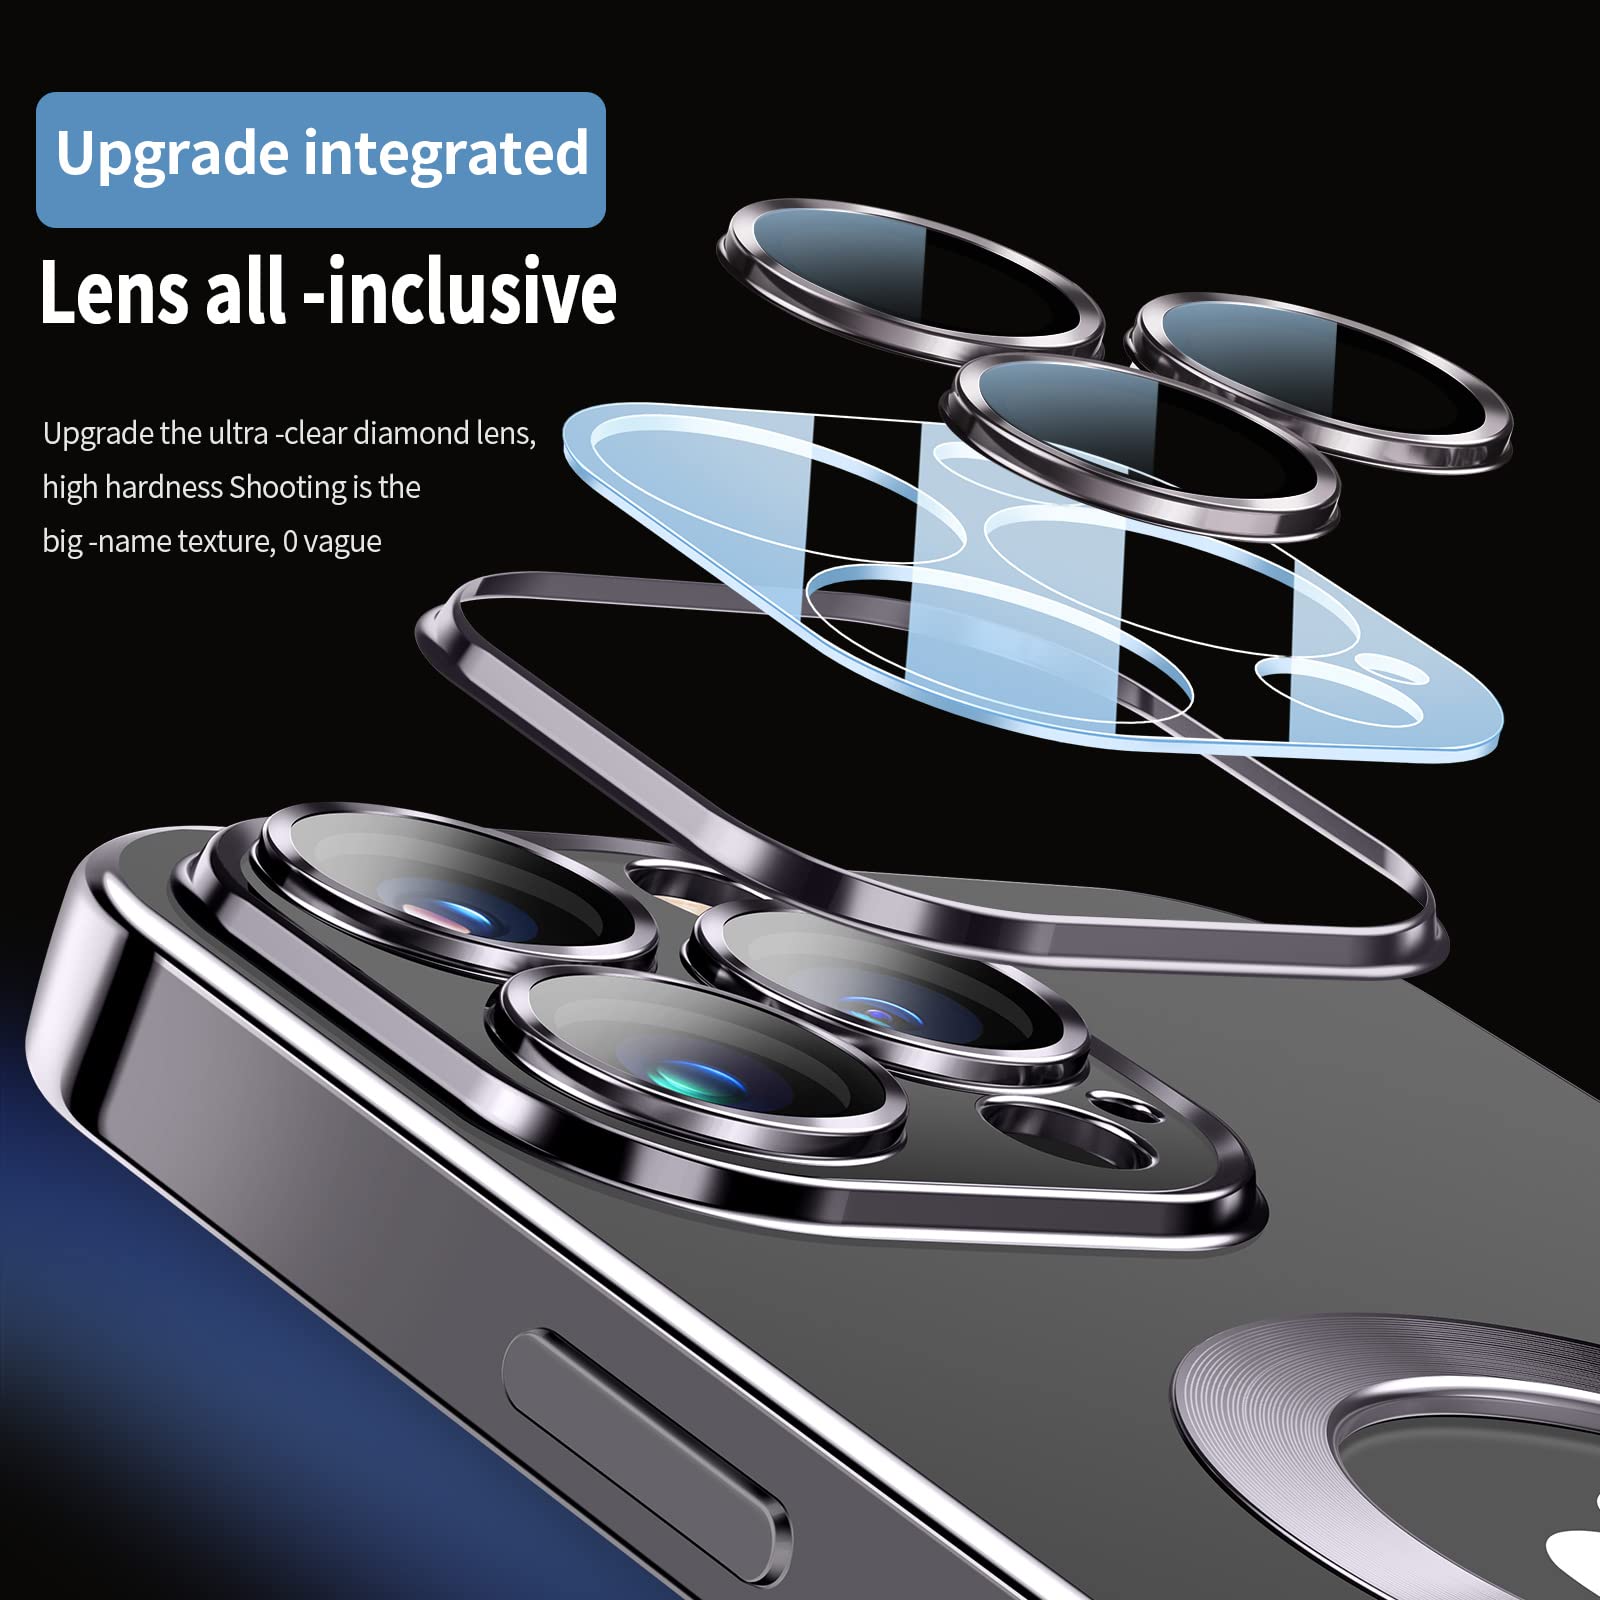 Drop Tested Protective, All-Round lens protection Shockproof Full-Body Cover Case for iPhone